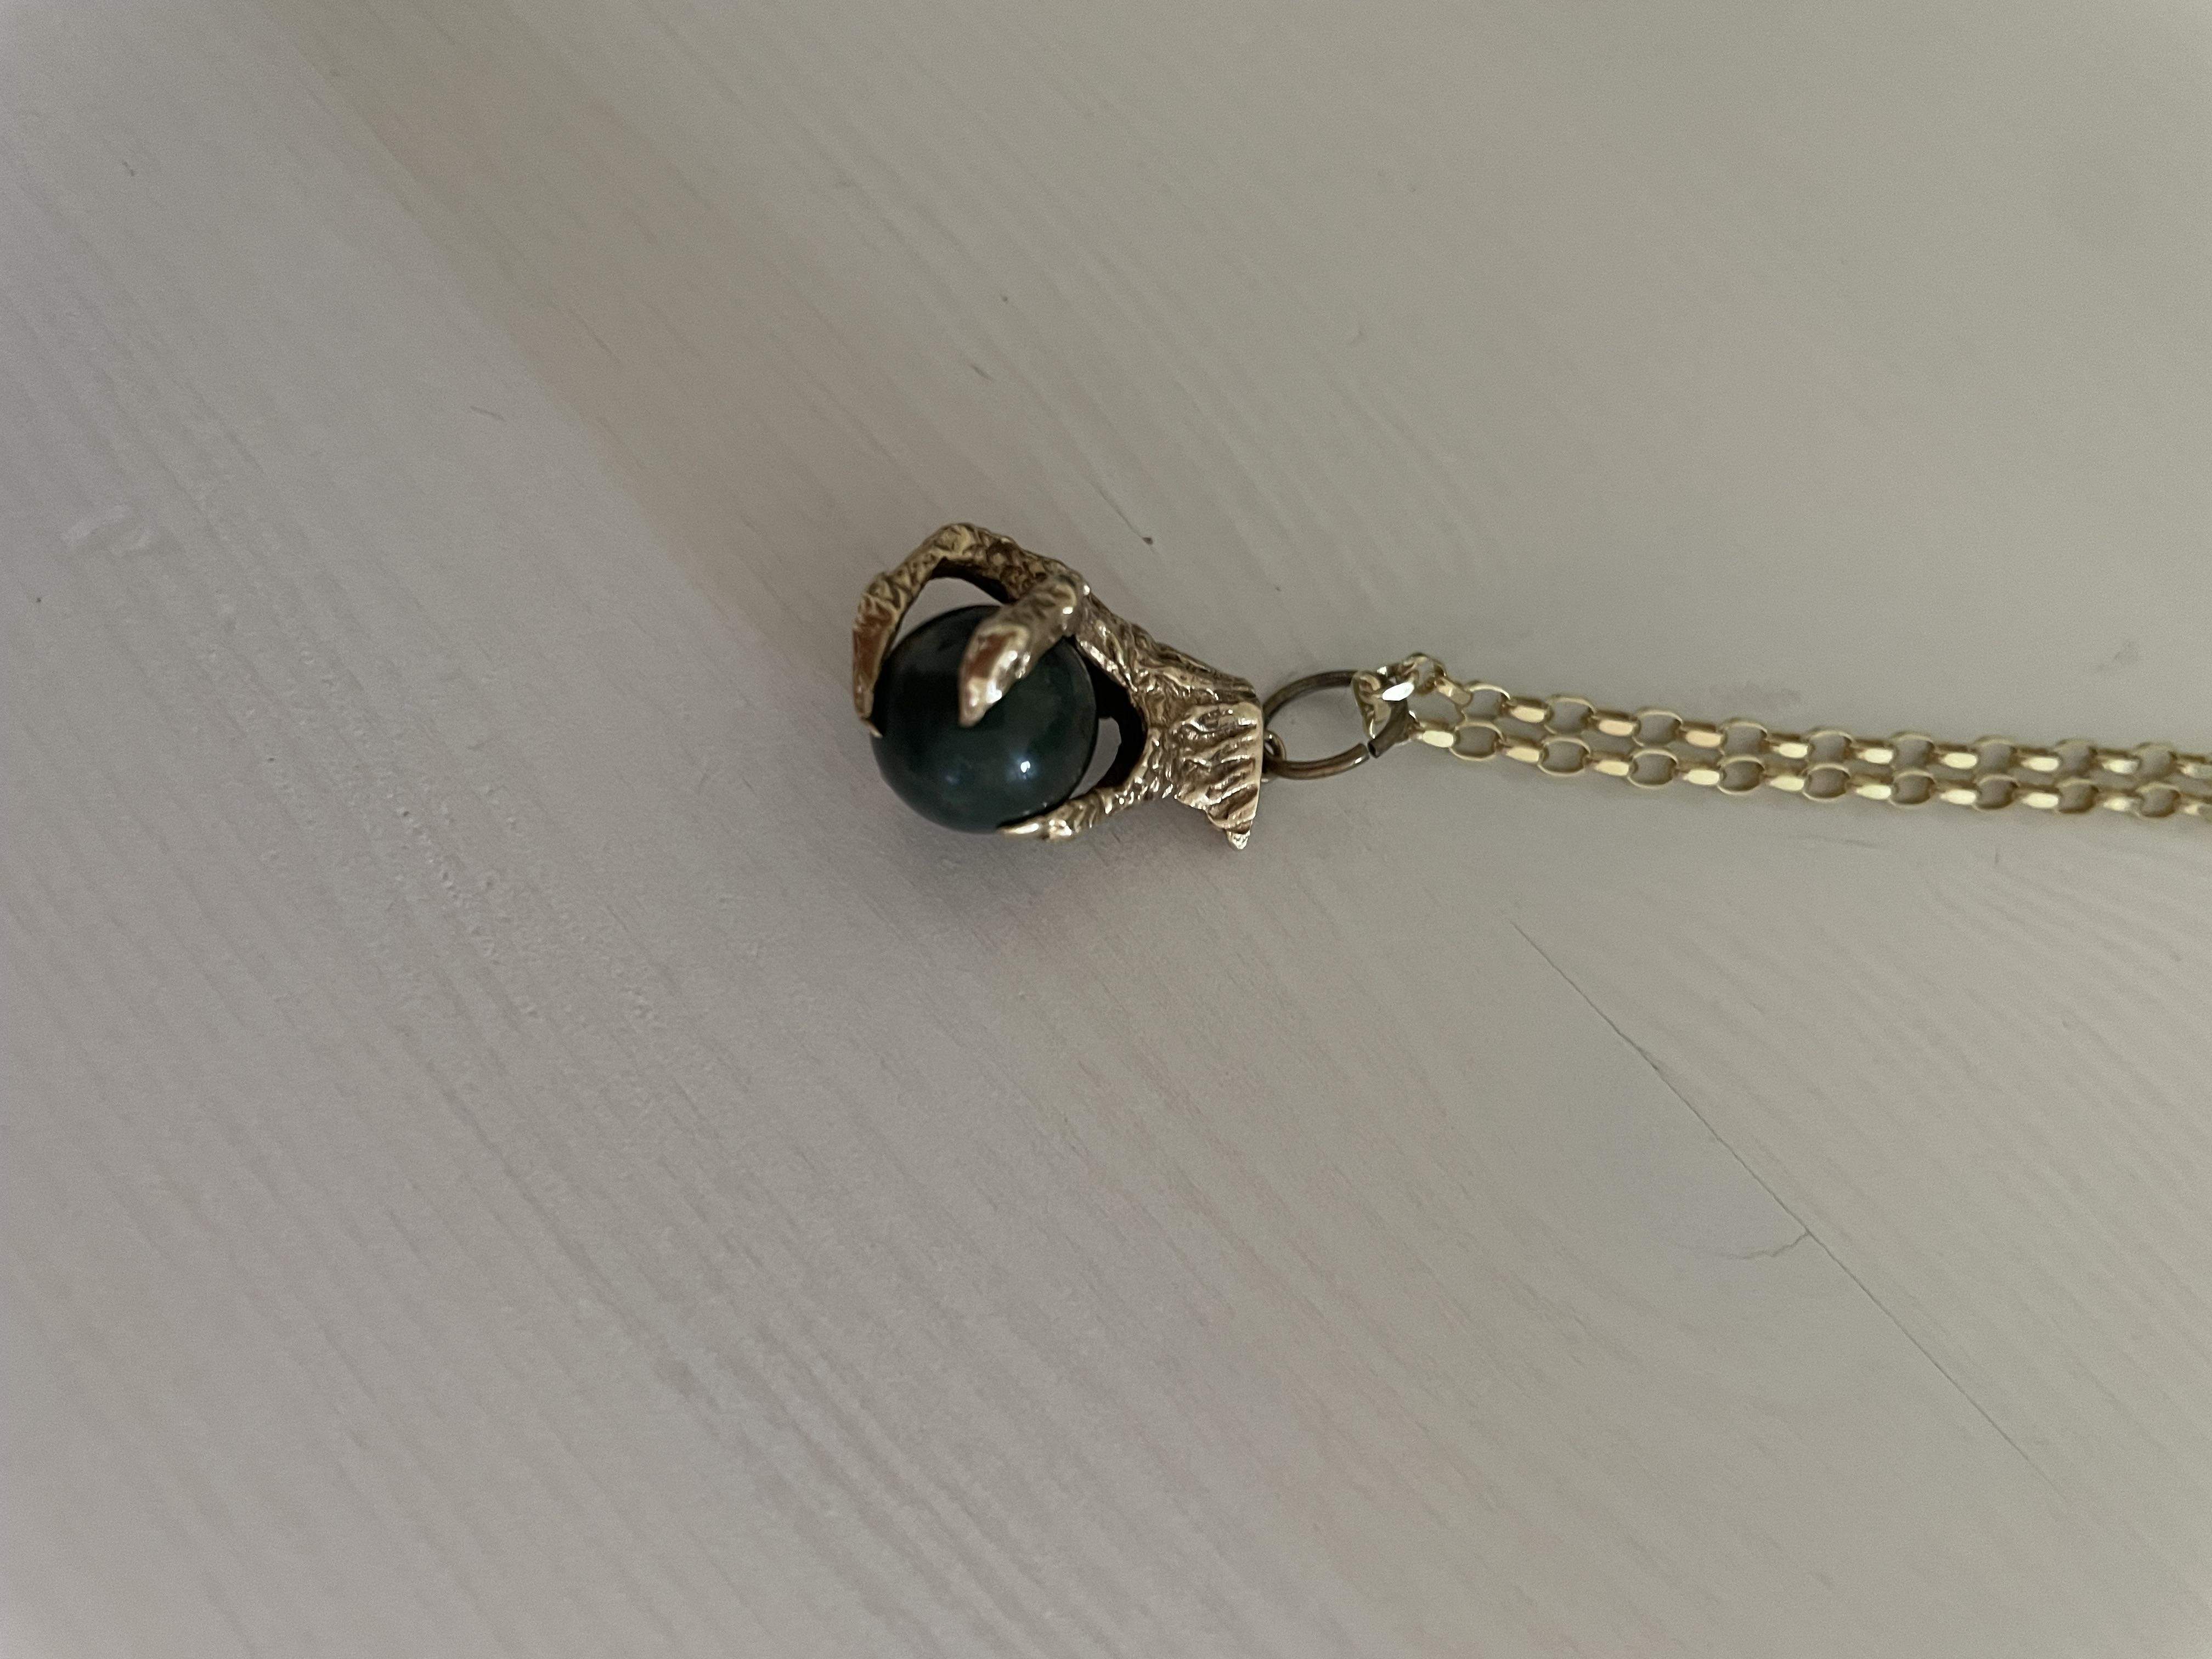 Claw pendant on chain